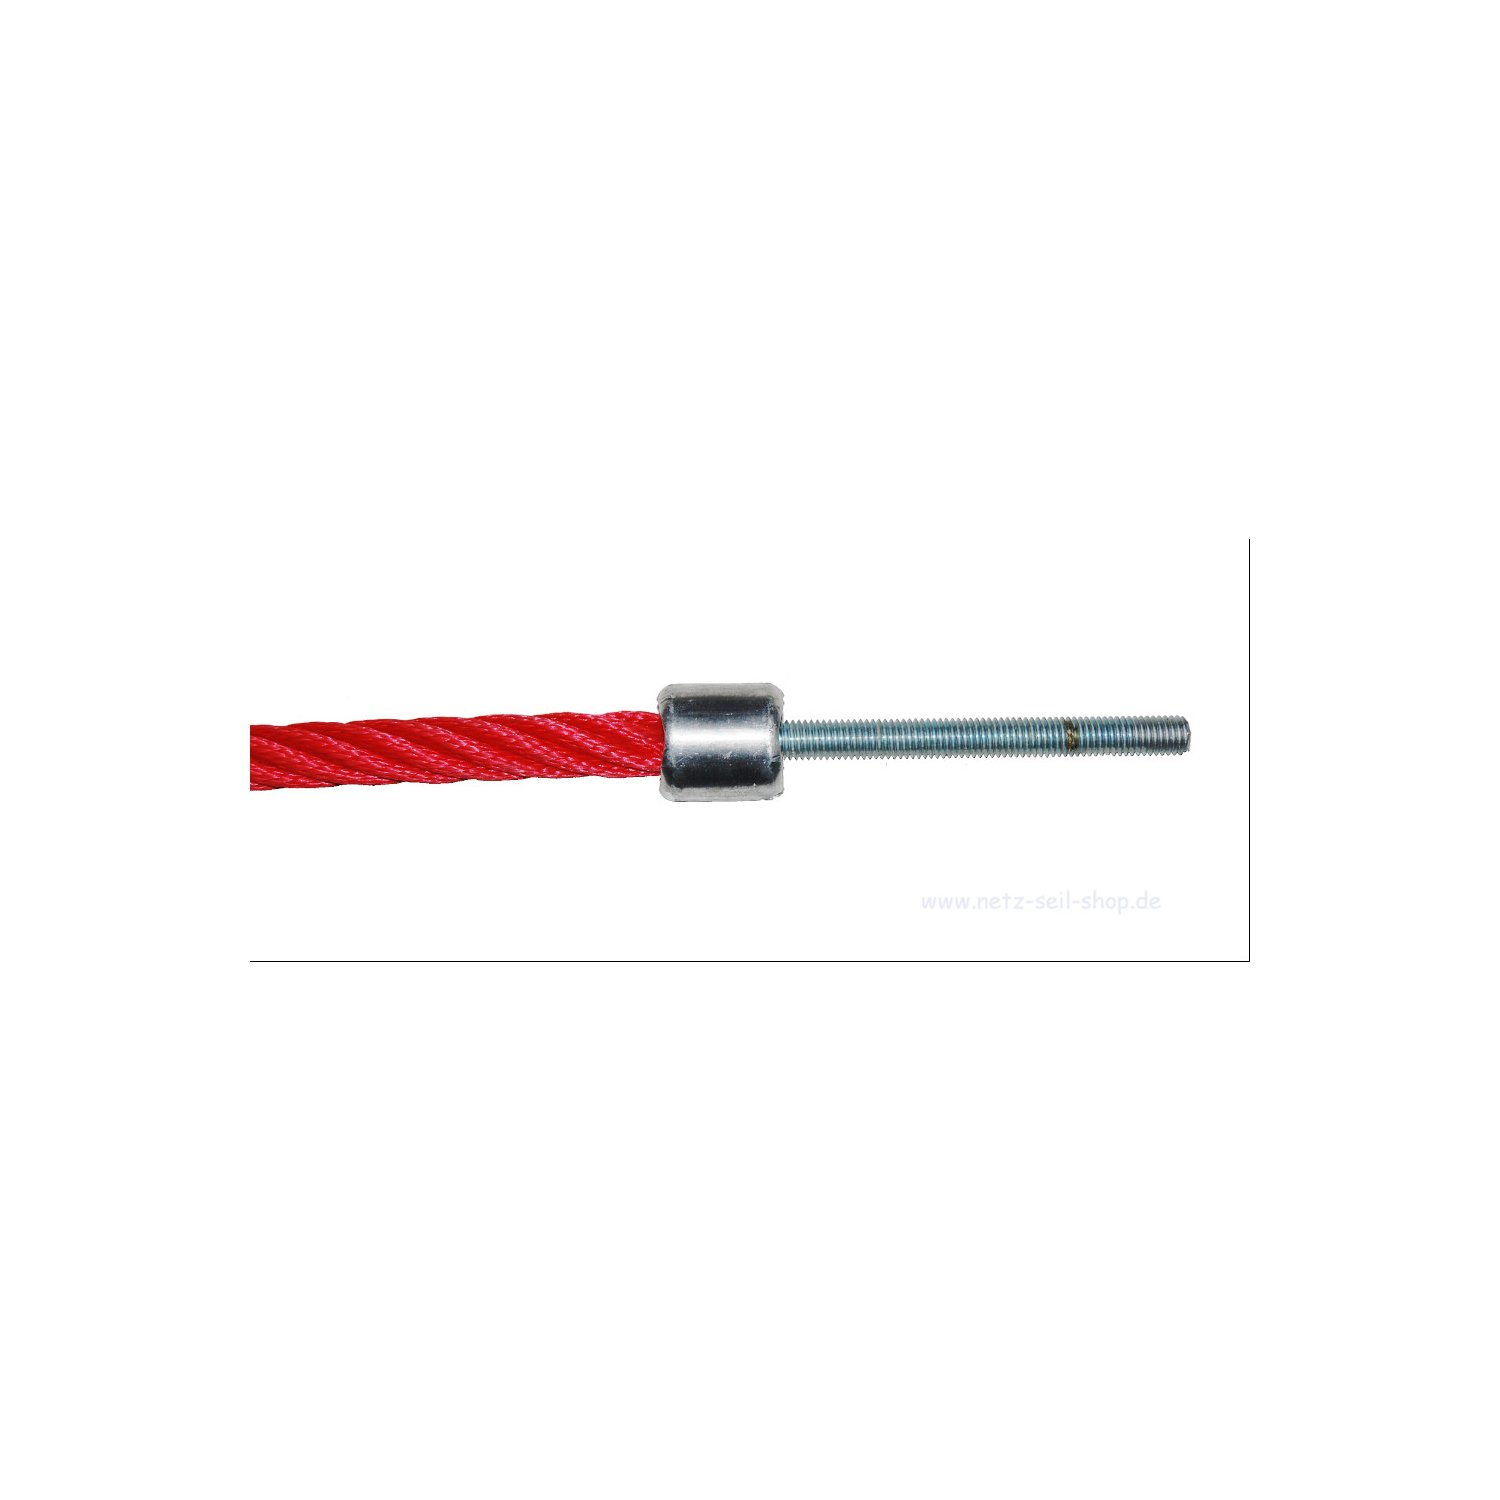 Threaded bolt M12 x 180 mm, galvanised, directly pressed [11,30 EUR]